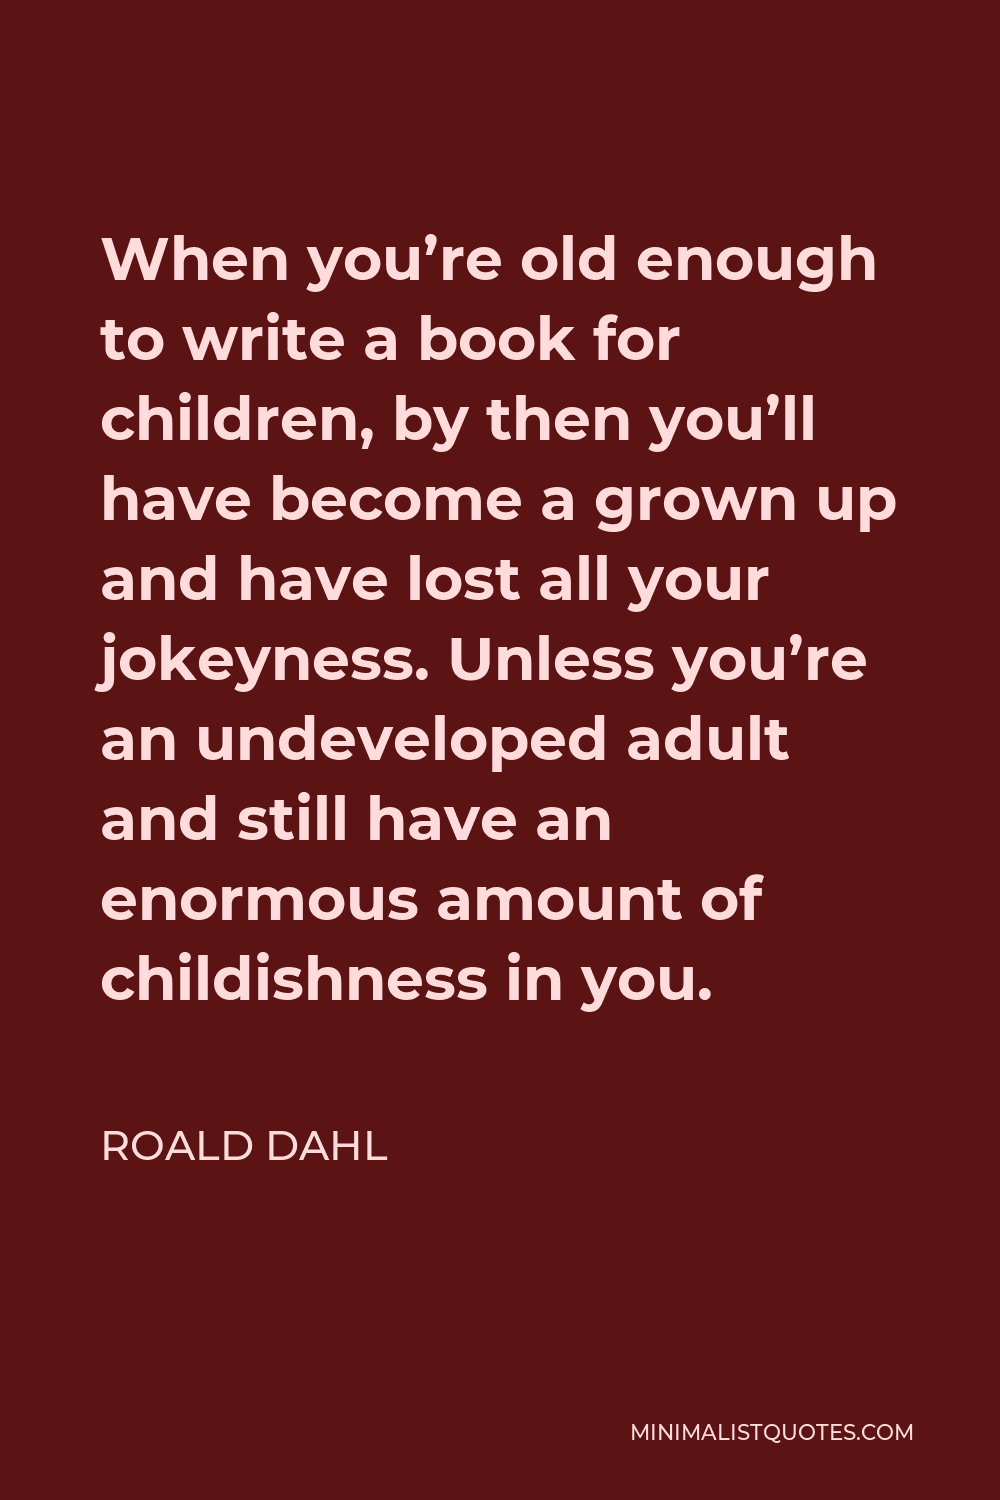 Roald Dahl Quote - When you’re old enough to write a book for children, by then you’ll have become a grown up and have lost all your jokeyness. Unless you’re an undeveloped adult and still have an enormous amount of childishness in you.